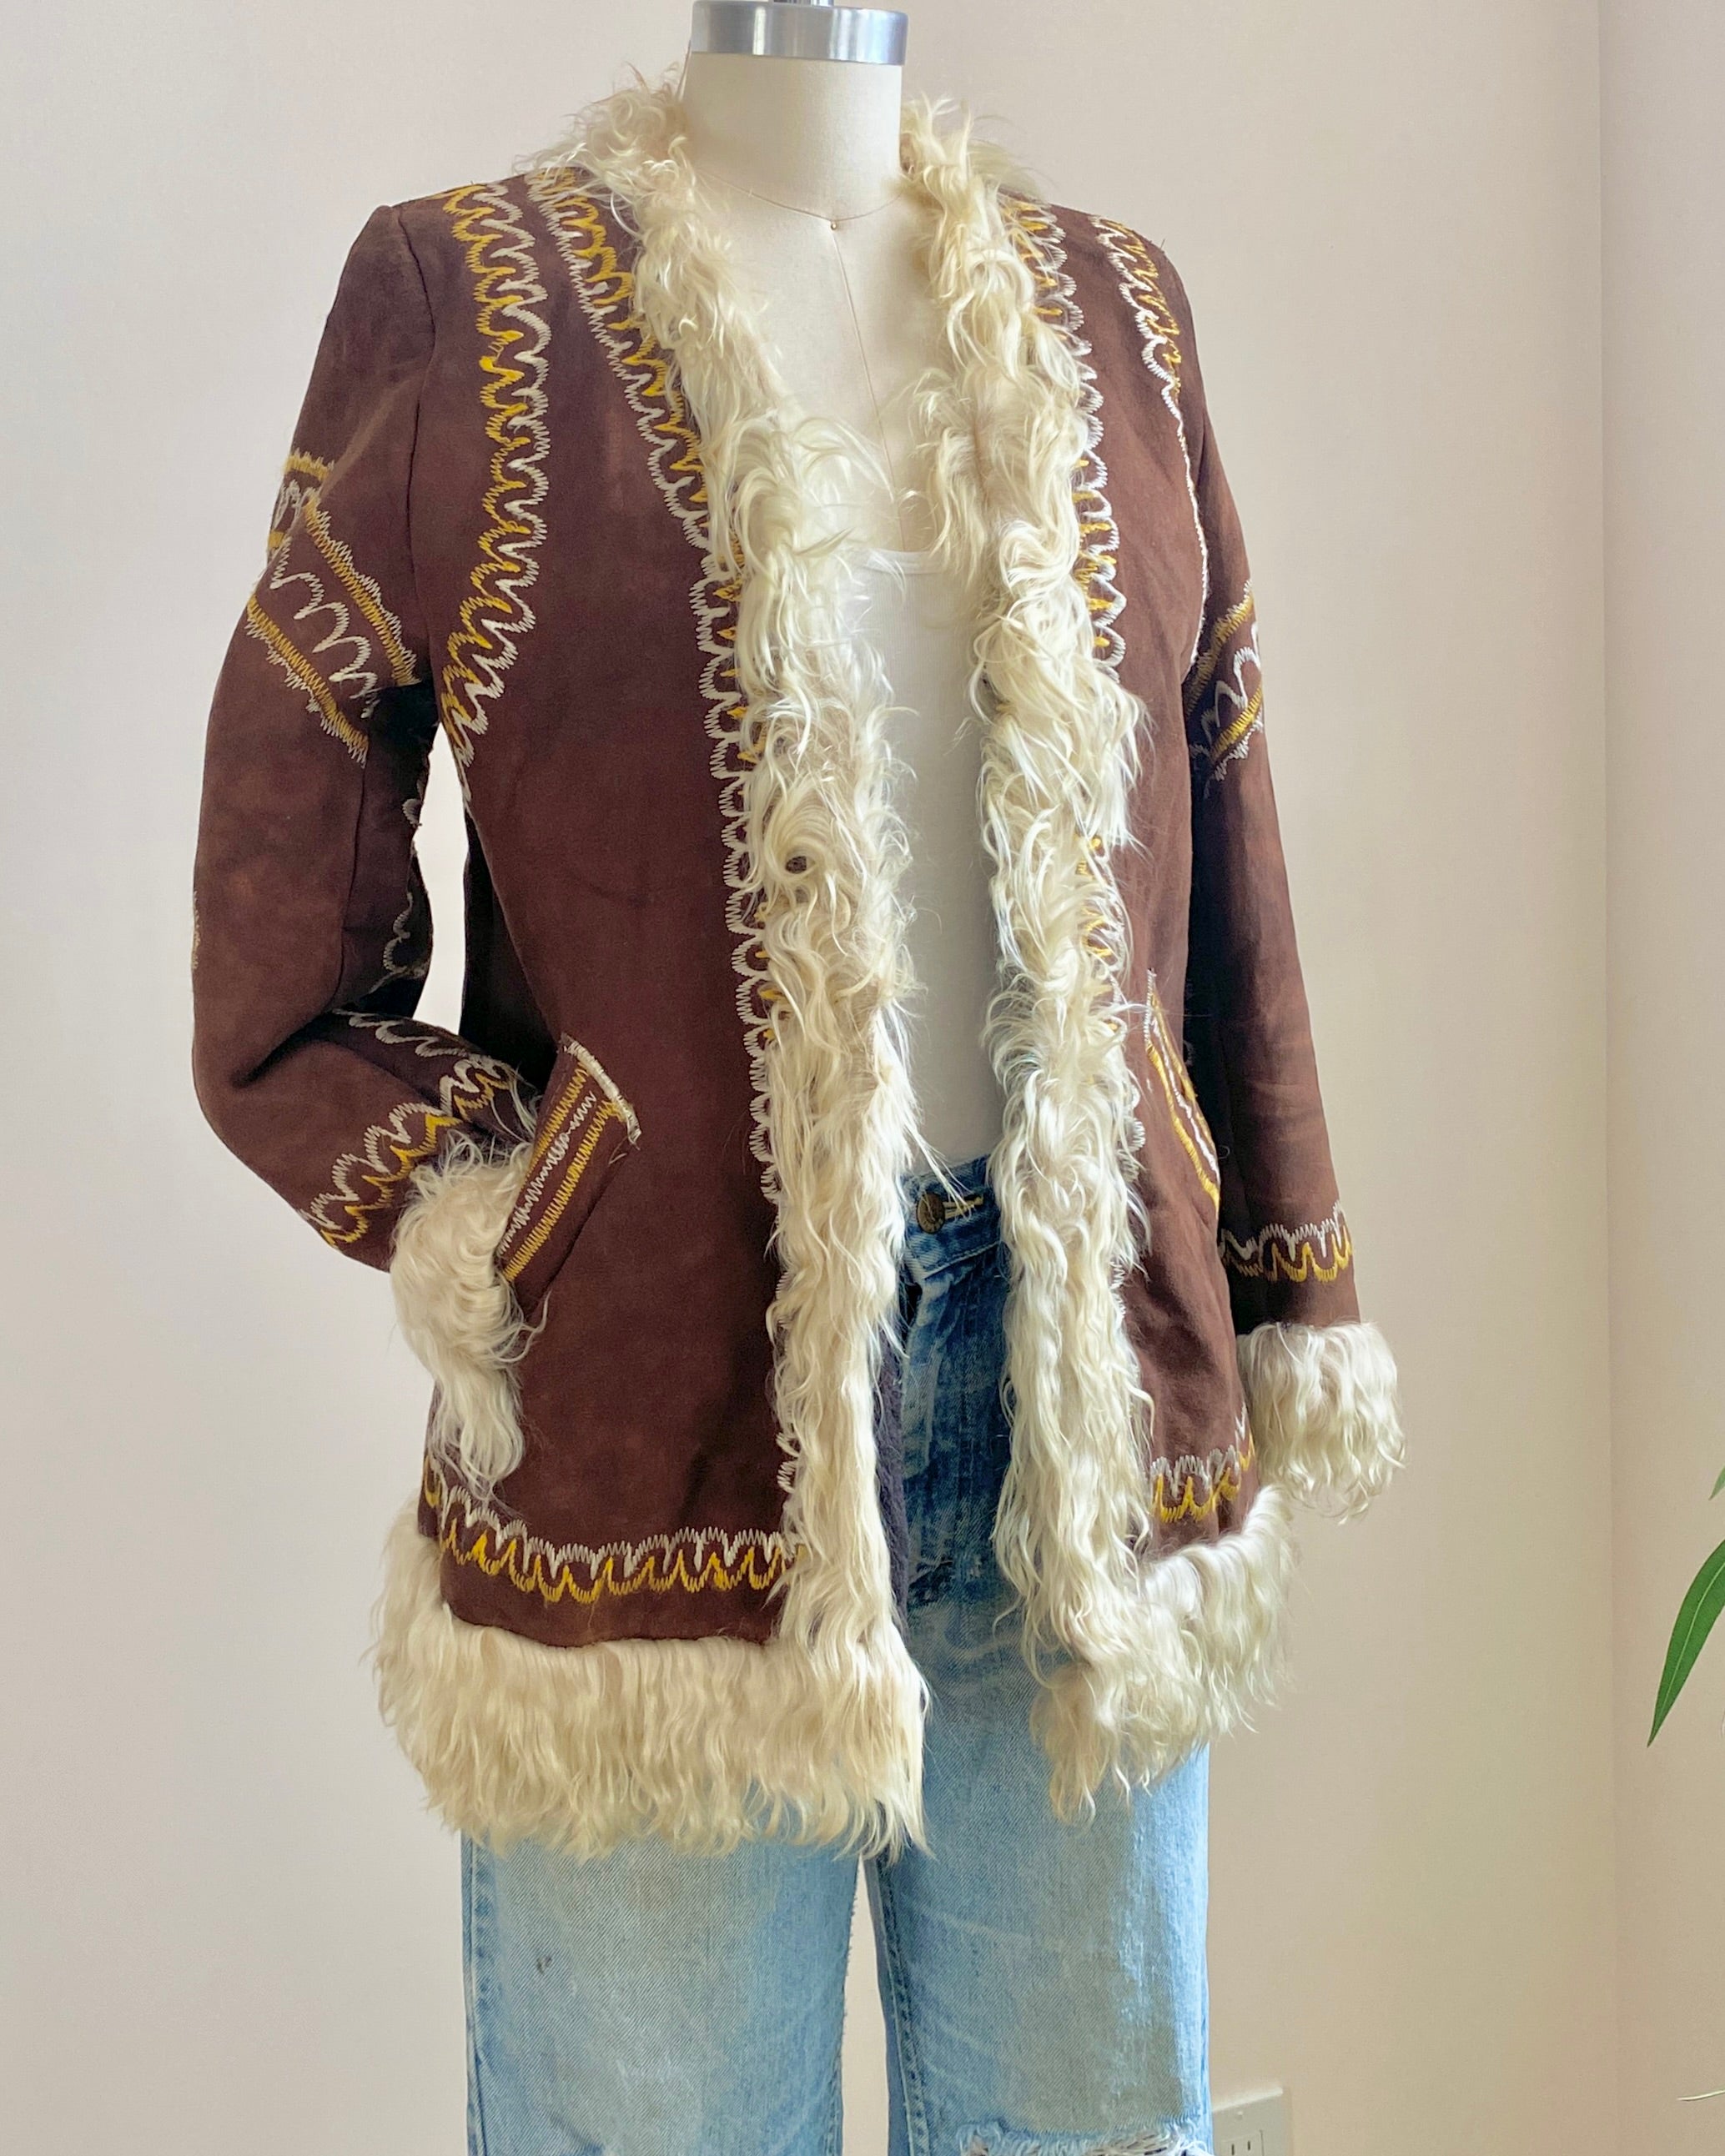 Vintage 1960s Afghan Shearling Suede Brown Penny Lane Coat Jacket with Silk Embroidery XS Janis Joplin Jimmy Hendrix Style